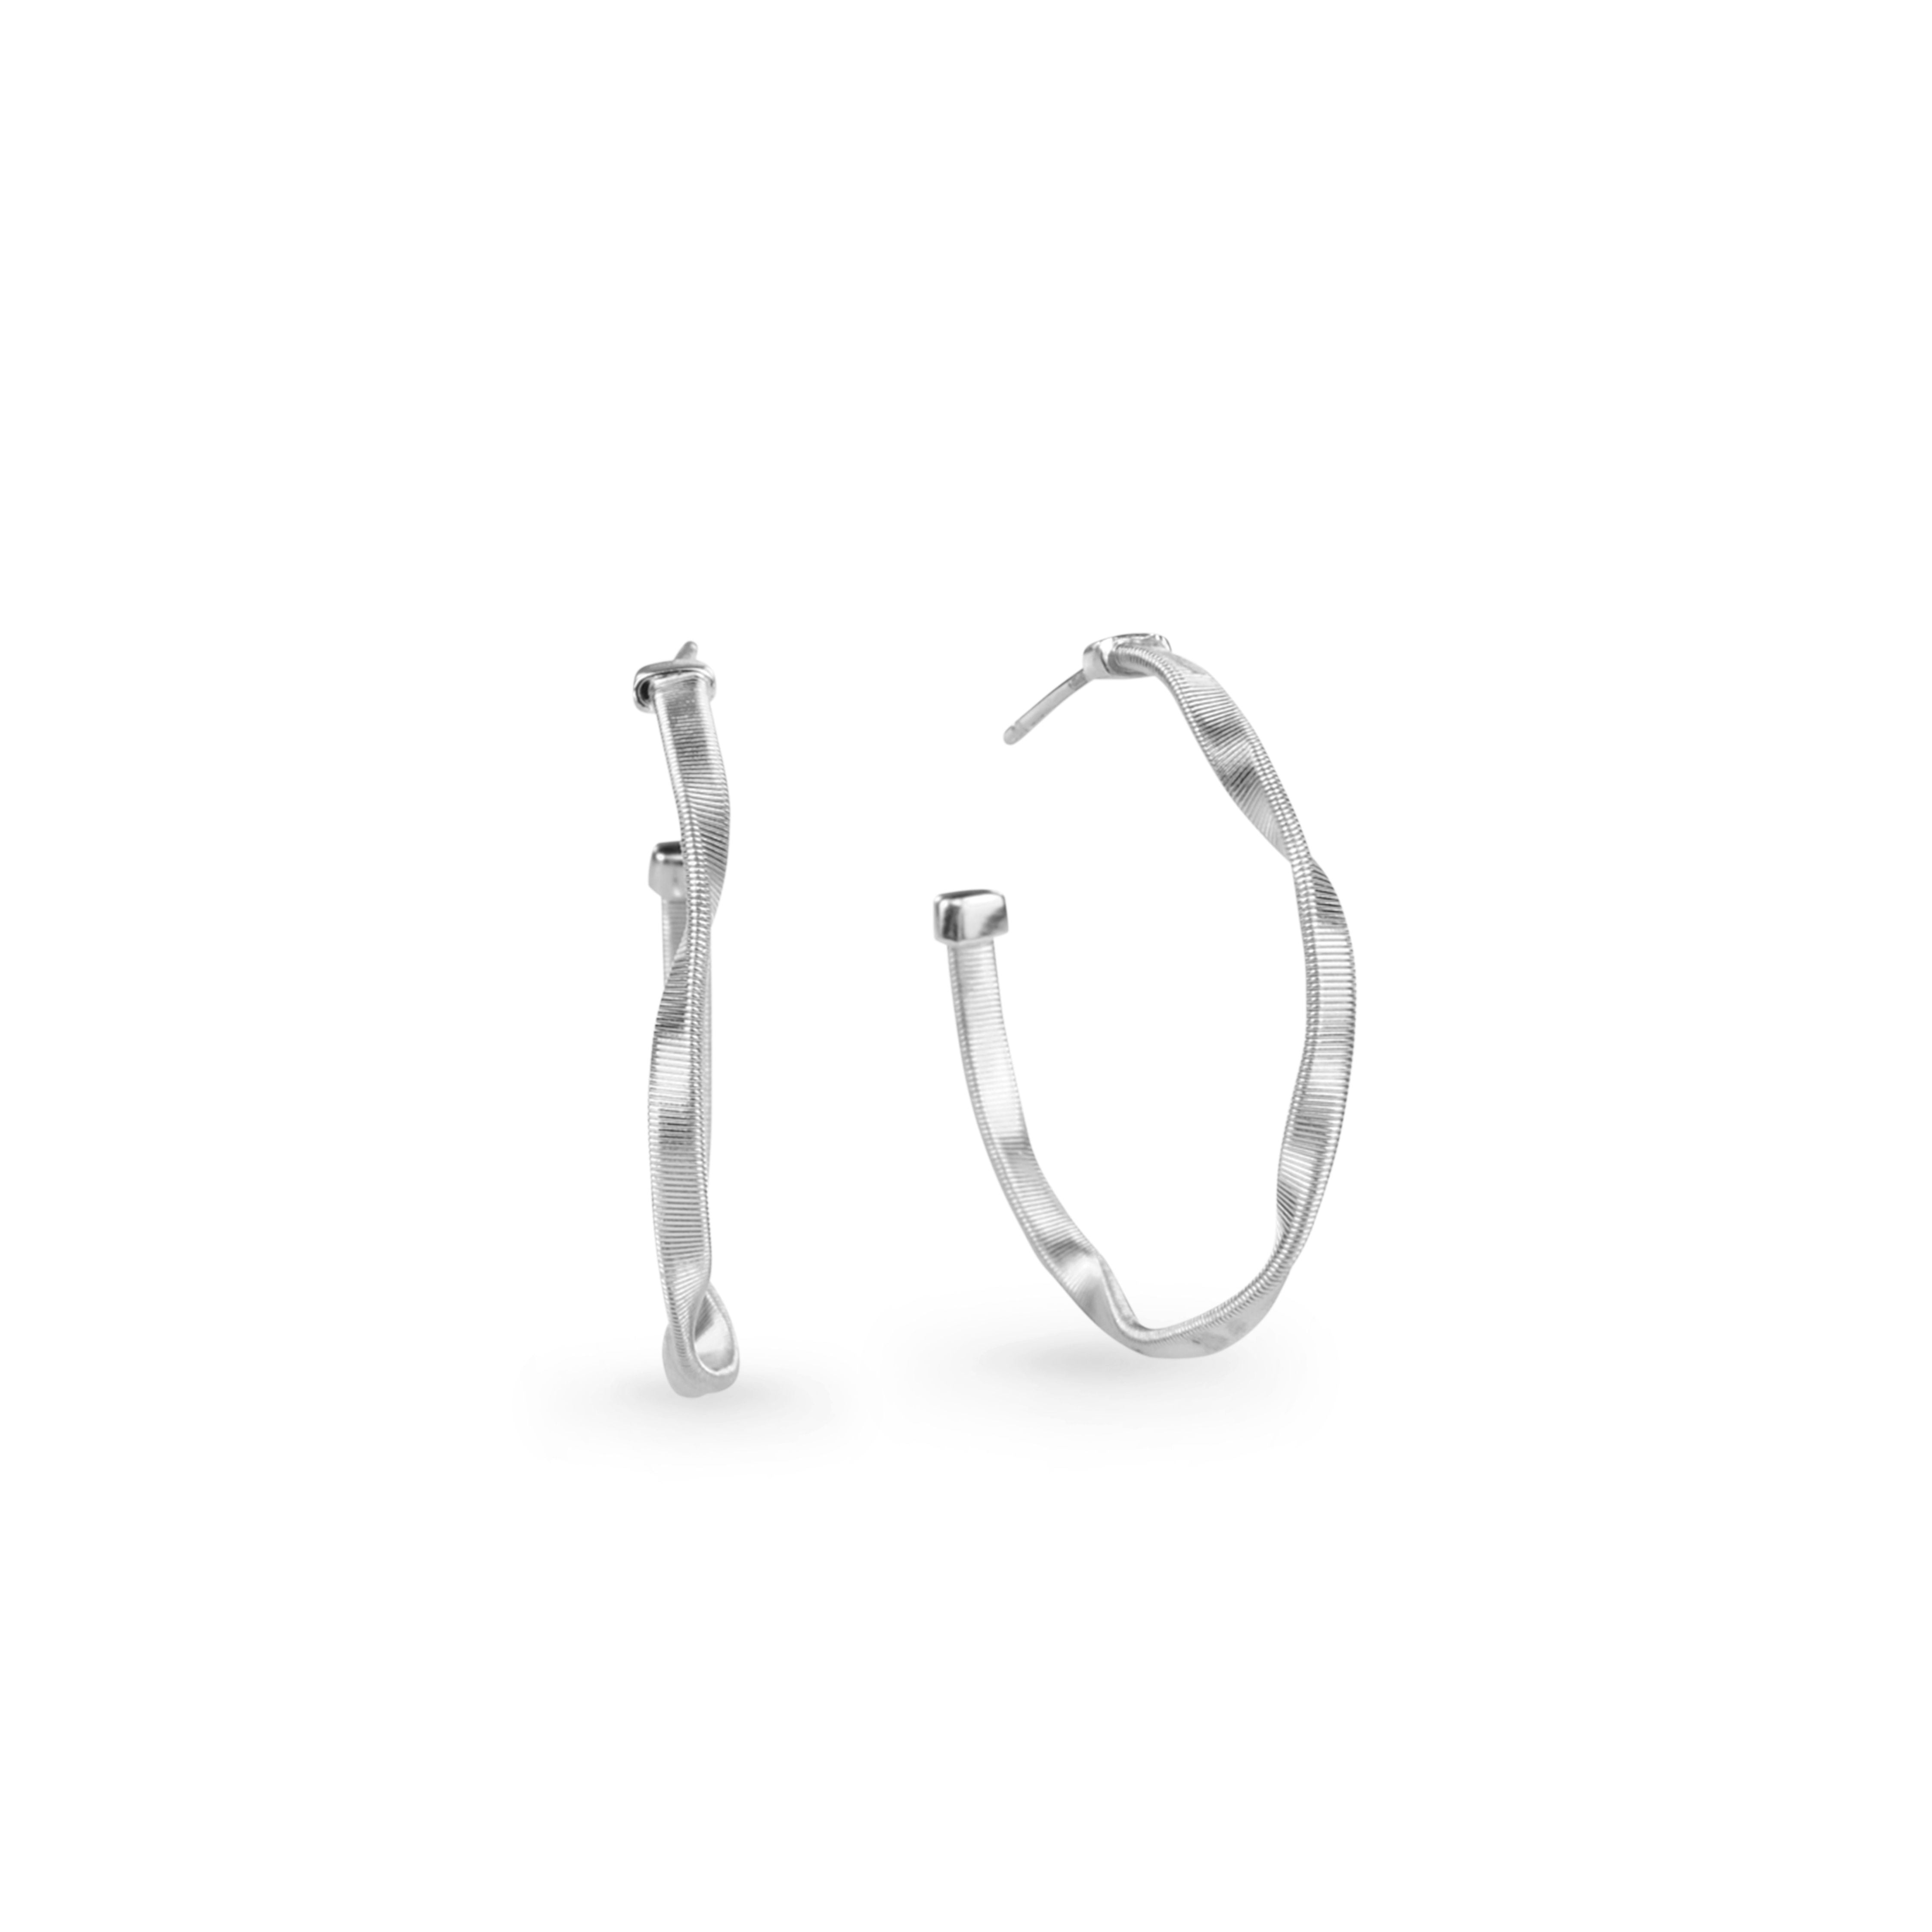 MARCO BICEGO 18K WHITE GOLD MEDIUM HOOP EARRINGS FROM THE MARRAKESH COLLECTION